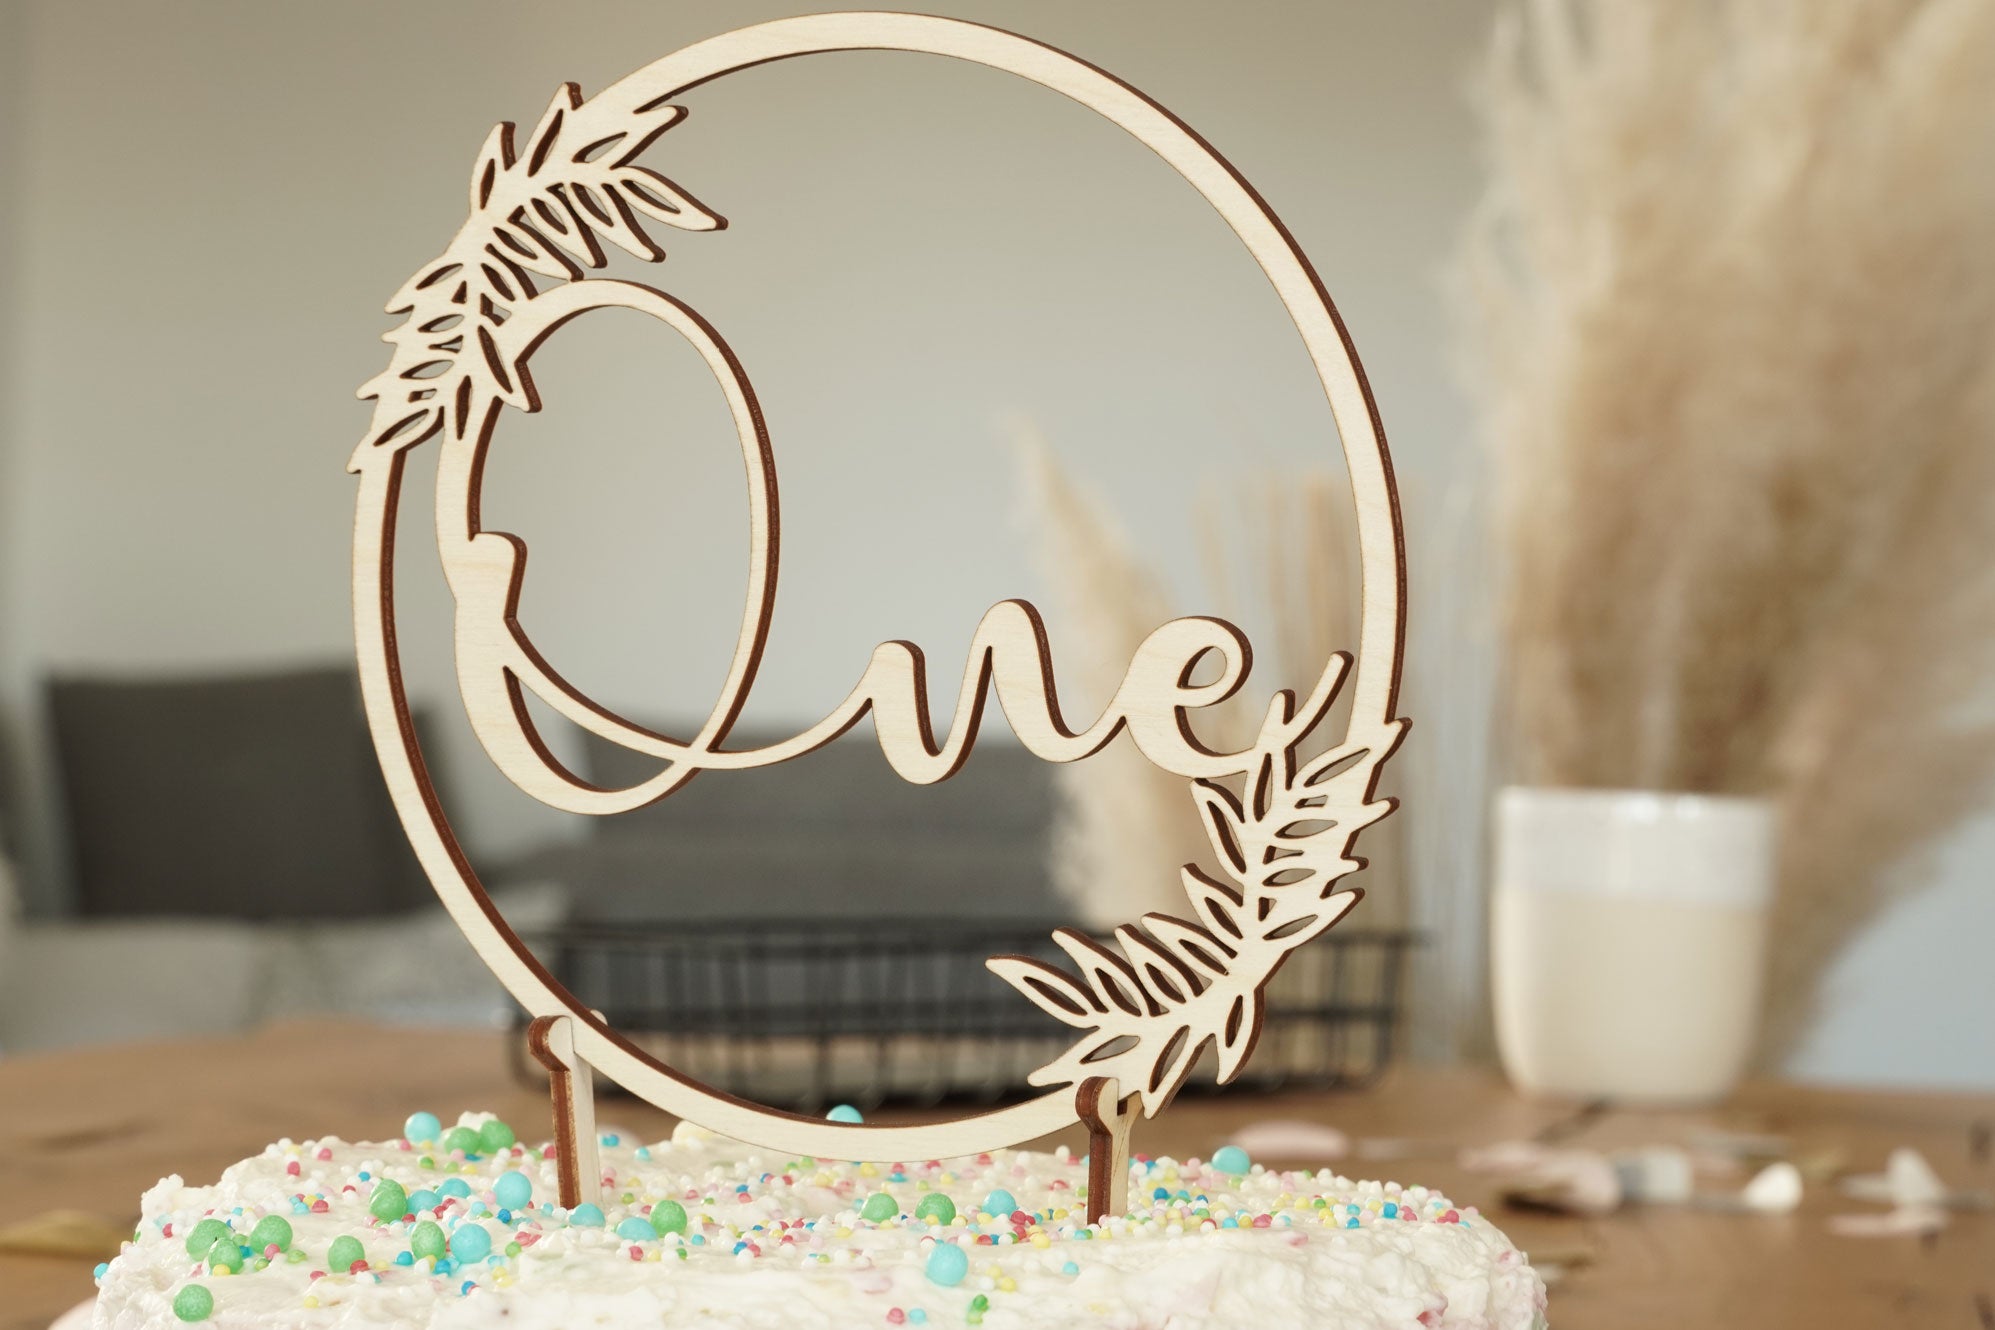 Cake Topper "One"